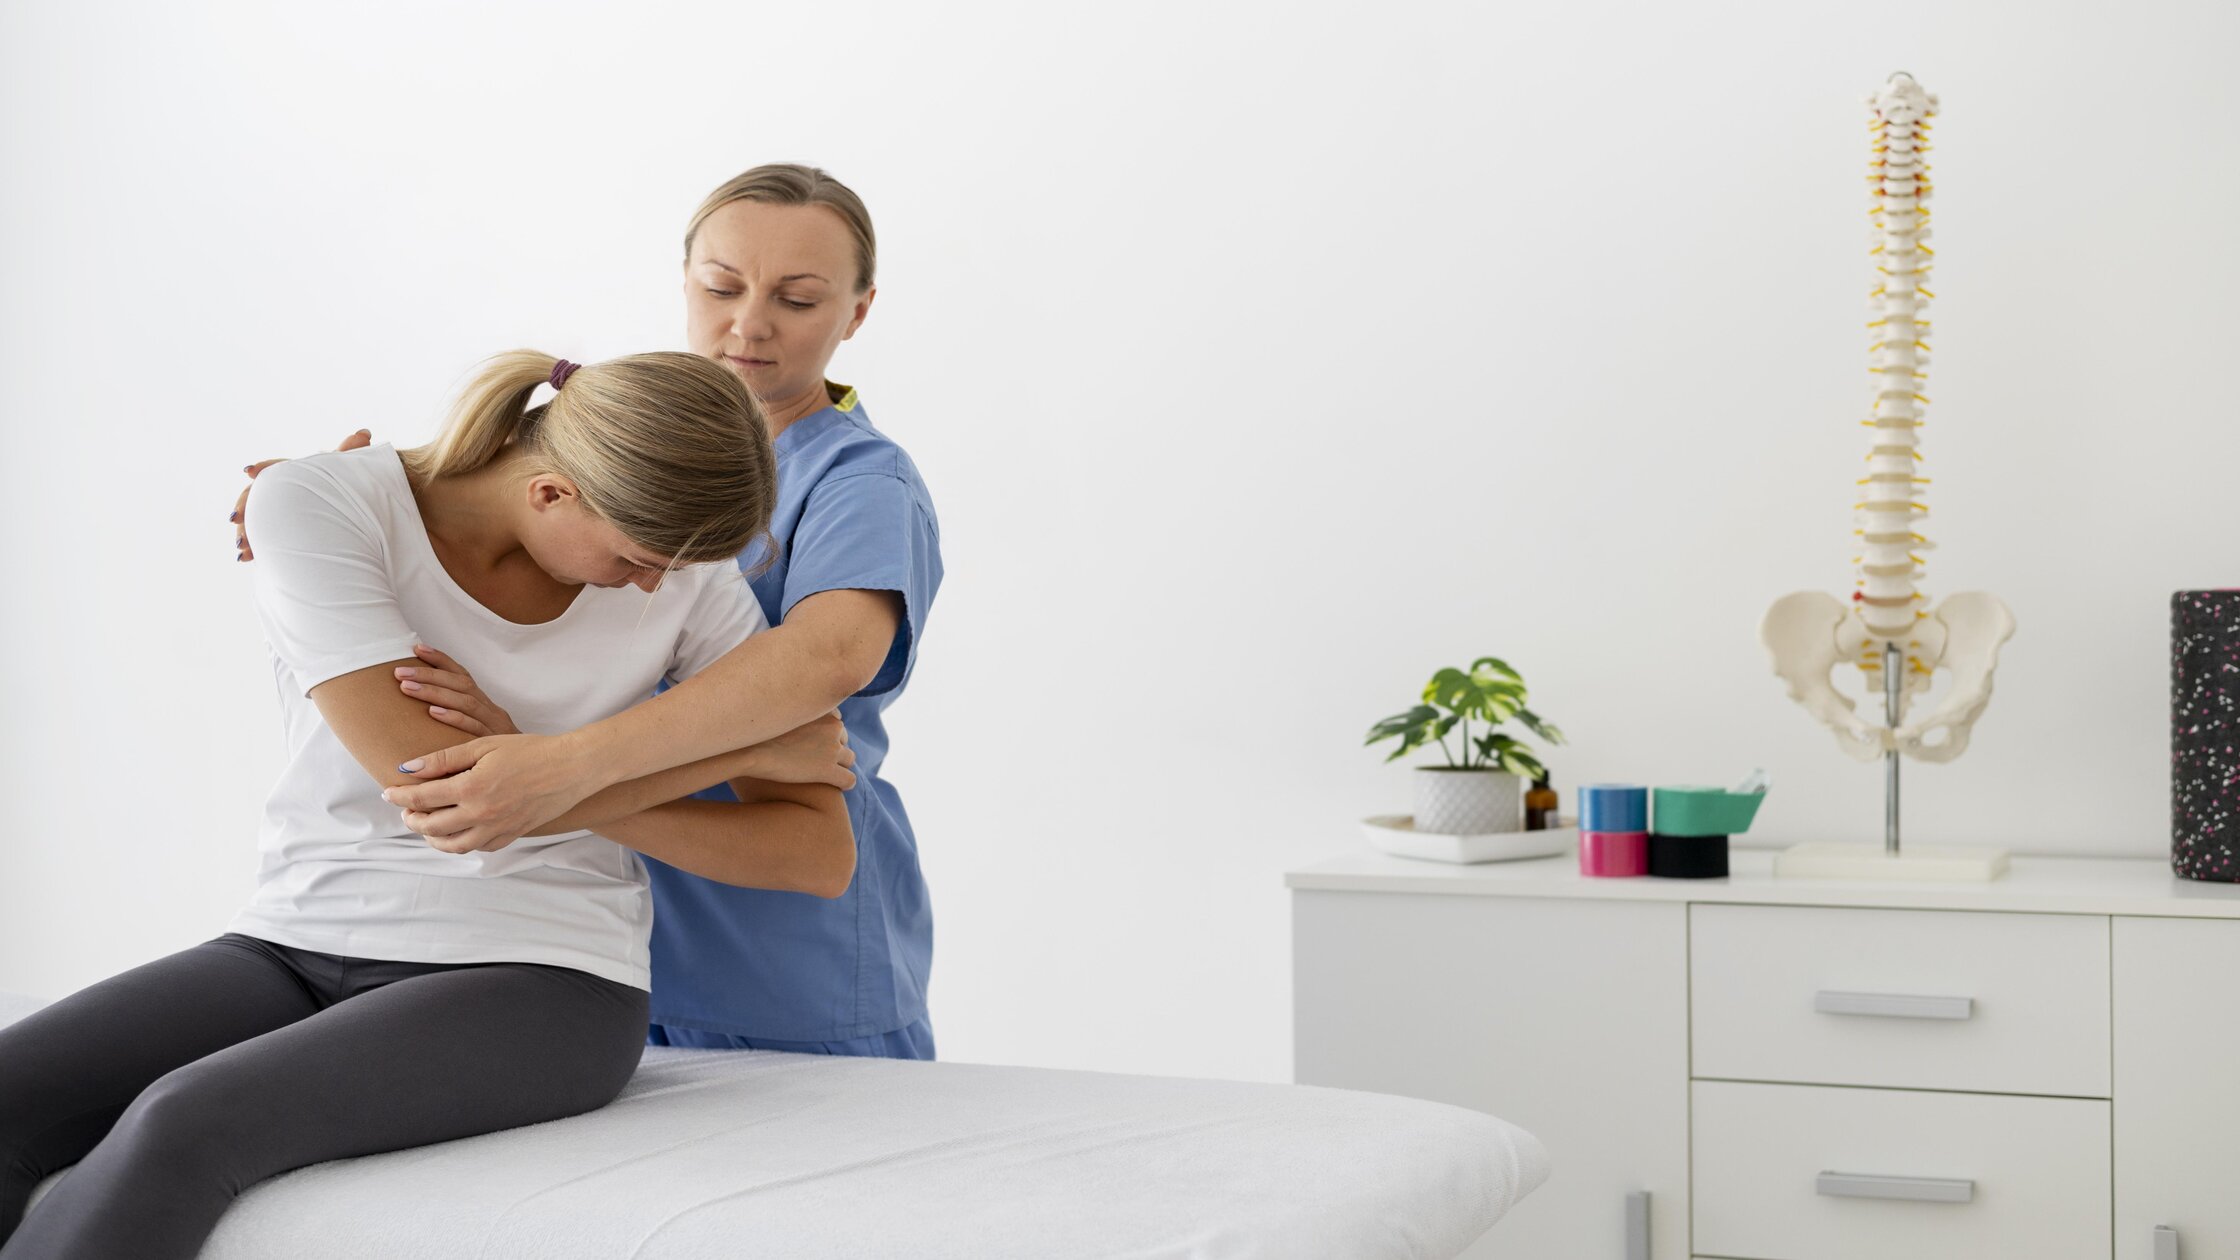 Physical Therapy for chronic pain